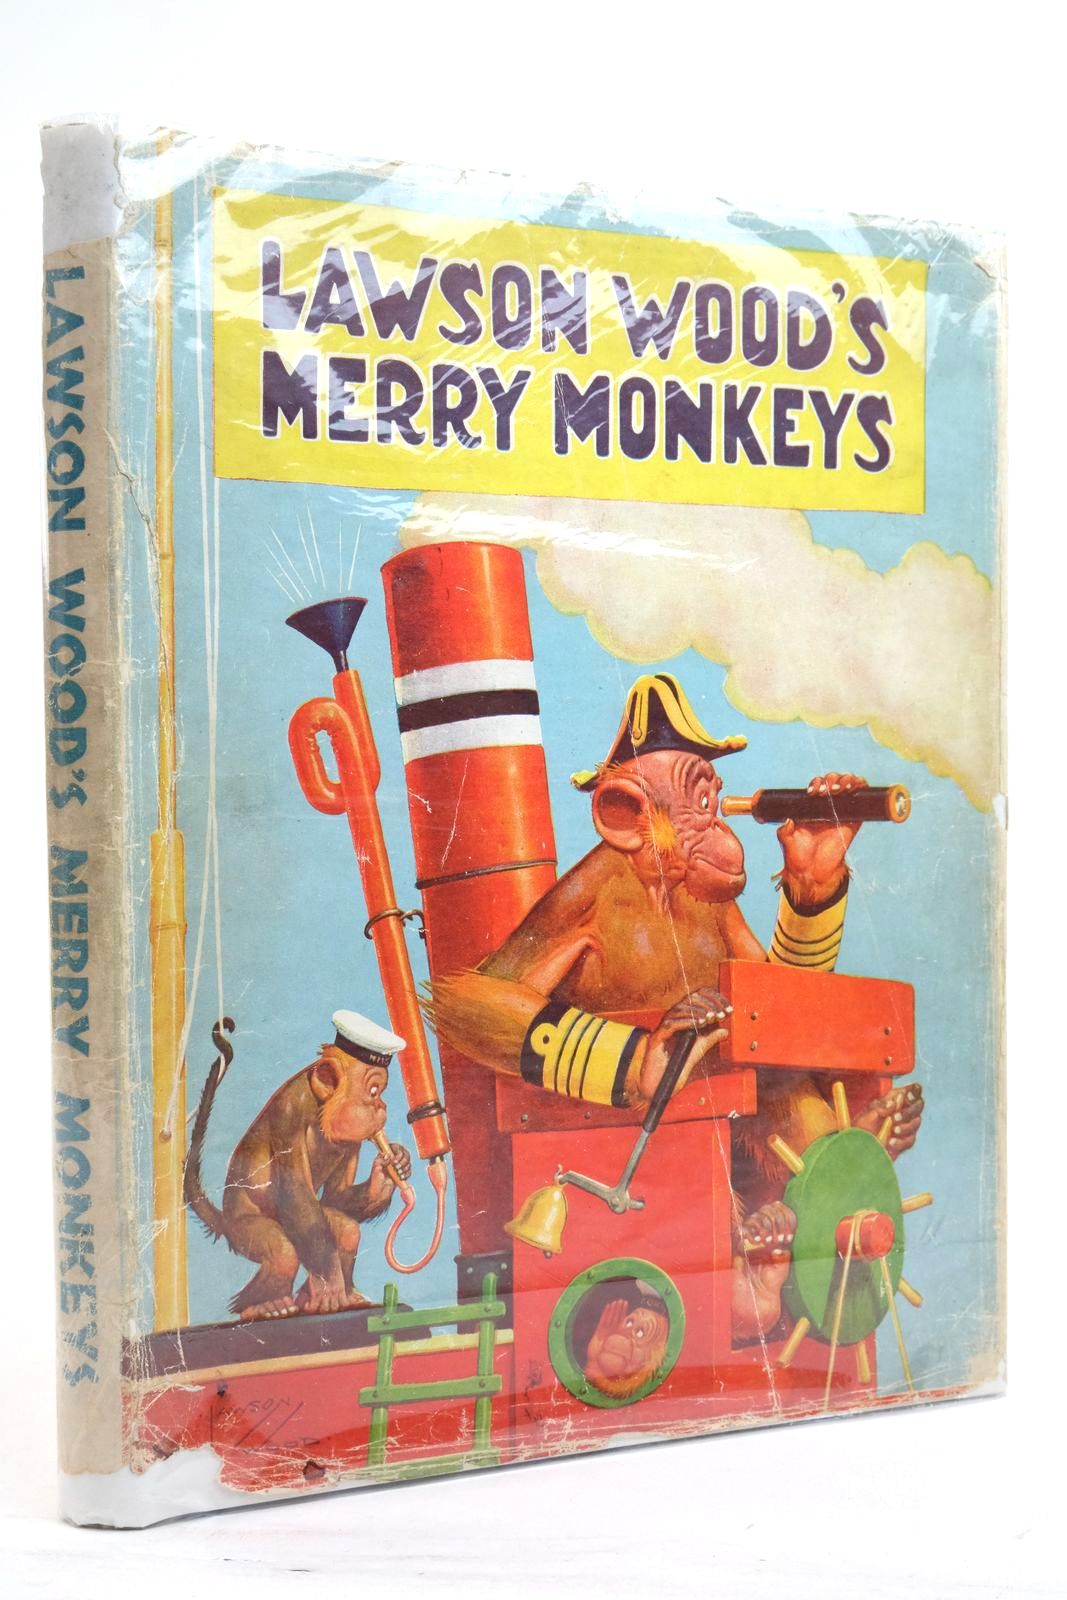 Photo of LAWSON WOOD'S MERRY MONKEYS written by Wood, Lawson illustrated by Wood, Lawson published by Birn Brothers Ltd. (STOCK CODE: 2137116)  for sale by Stella & Rose's Books